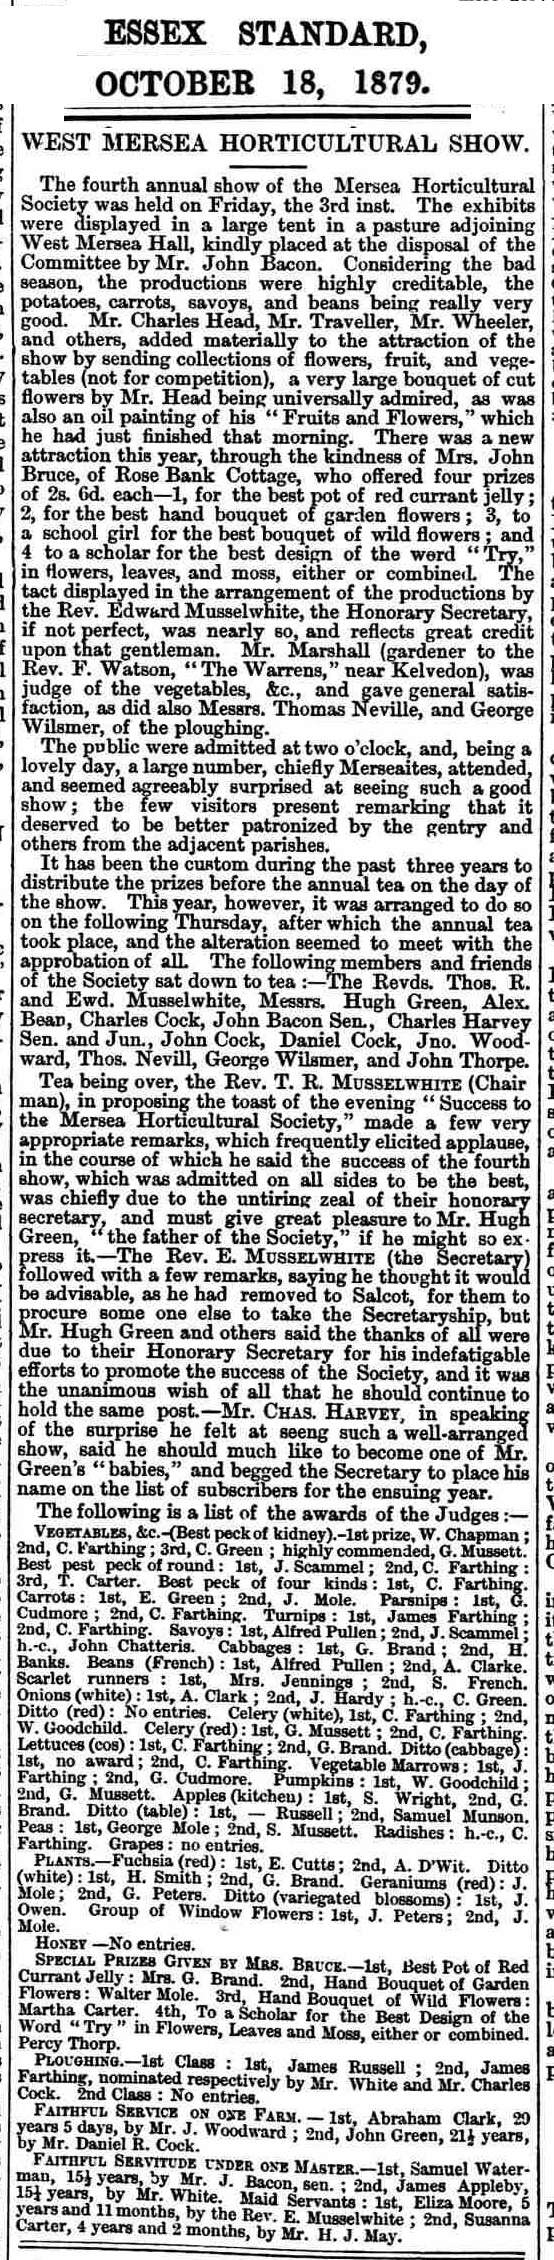  Fourth annual show report.

Mersea Island Horticultural Society.

From The Essex Standard 18 October 1879 
Cat1 Mersea-->Clubs & Organisations